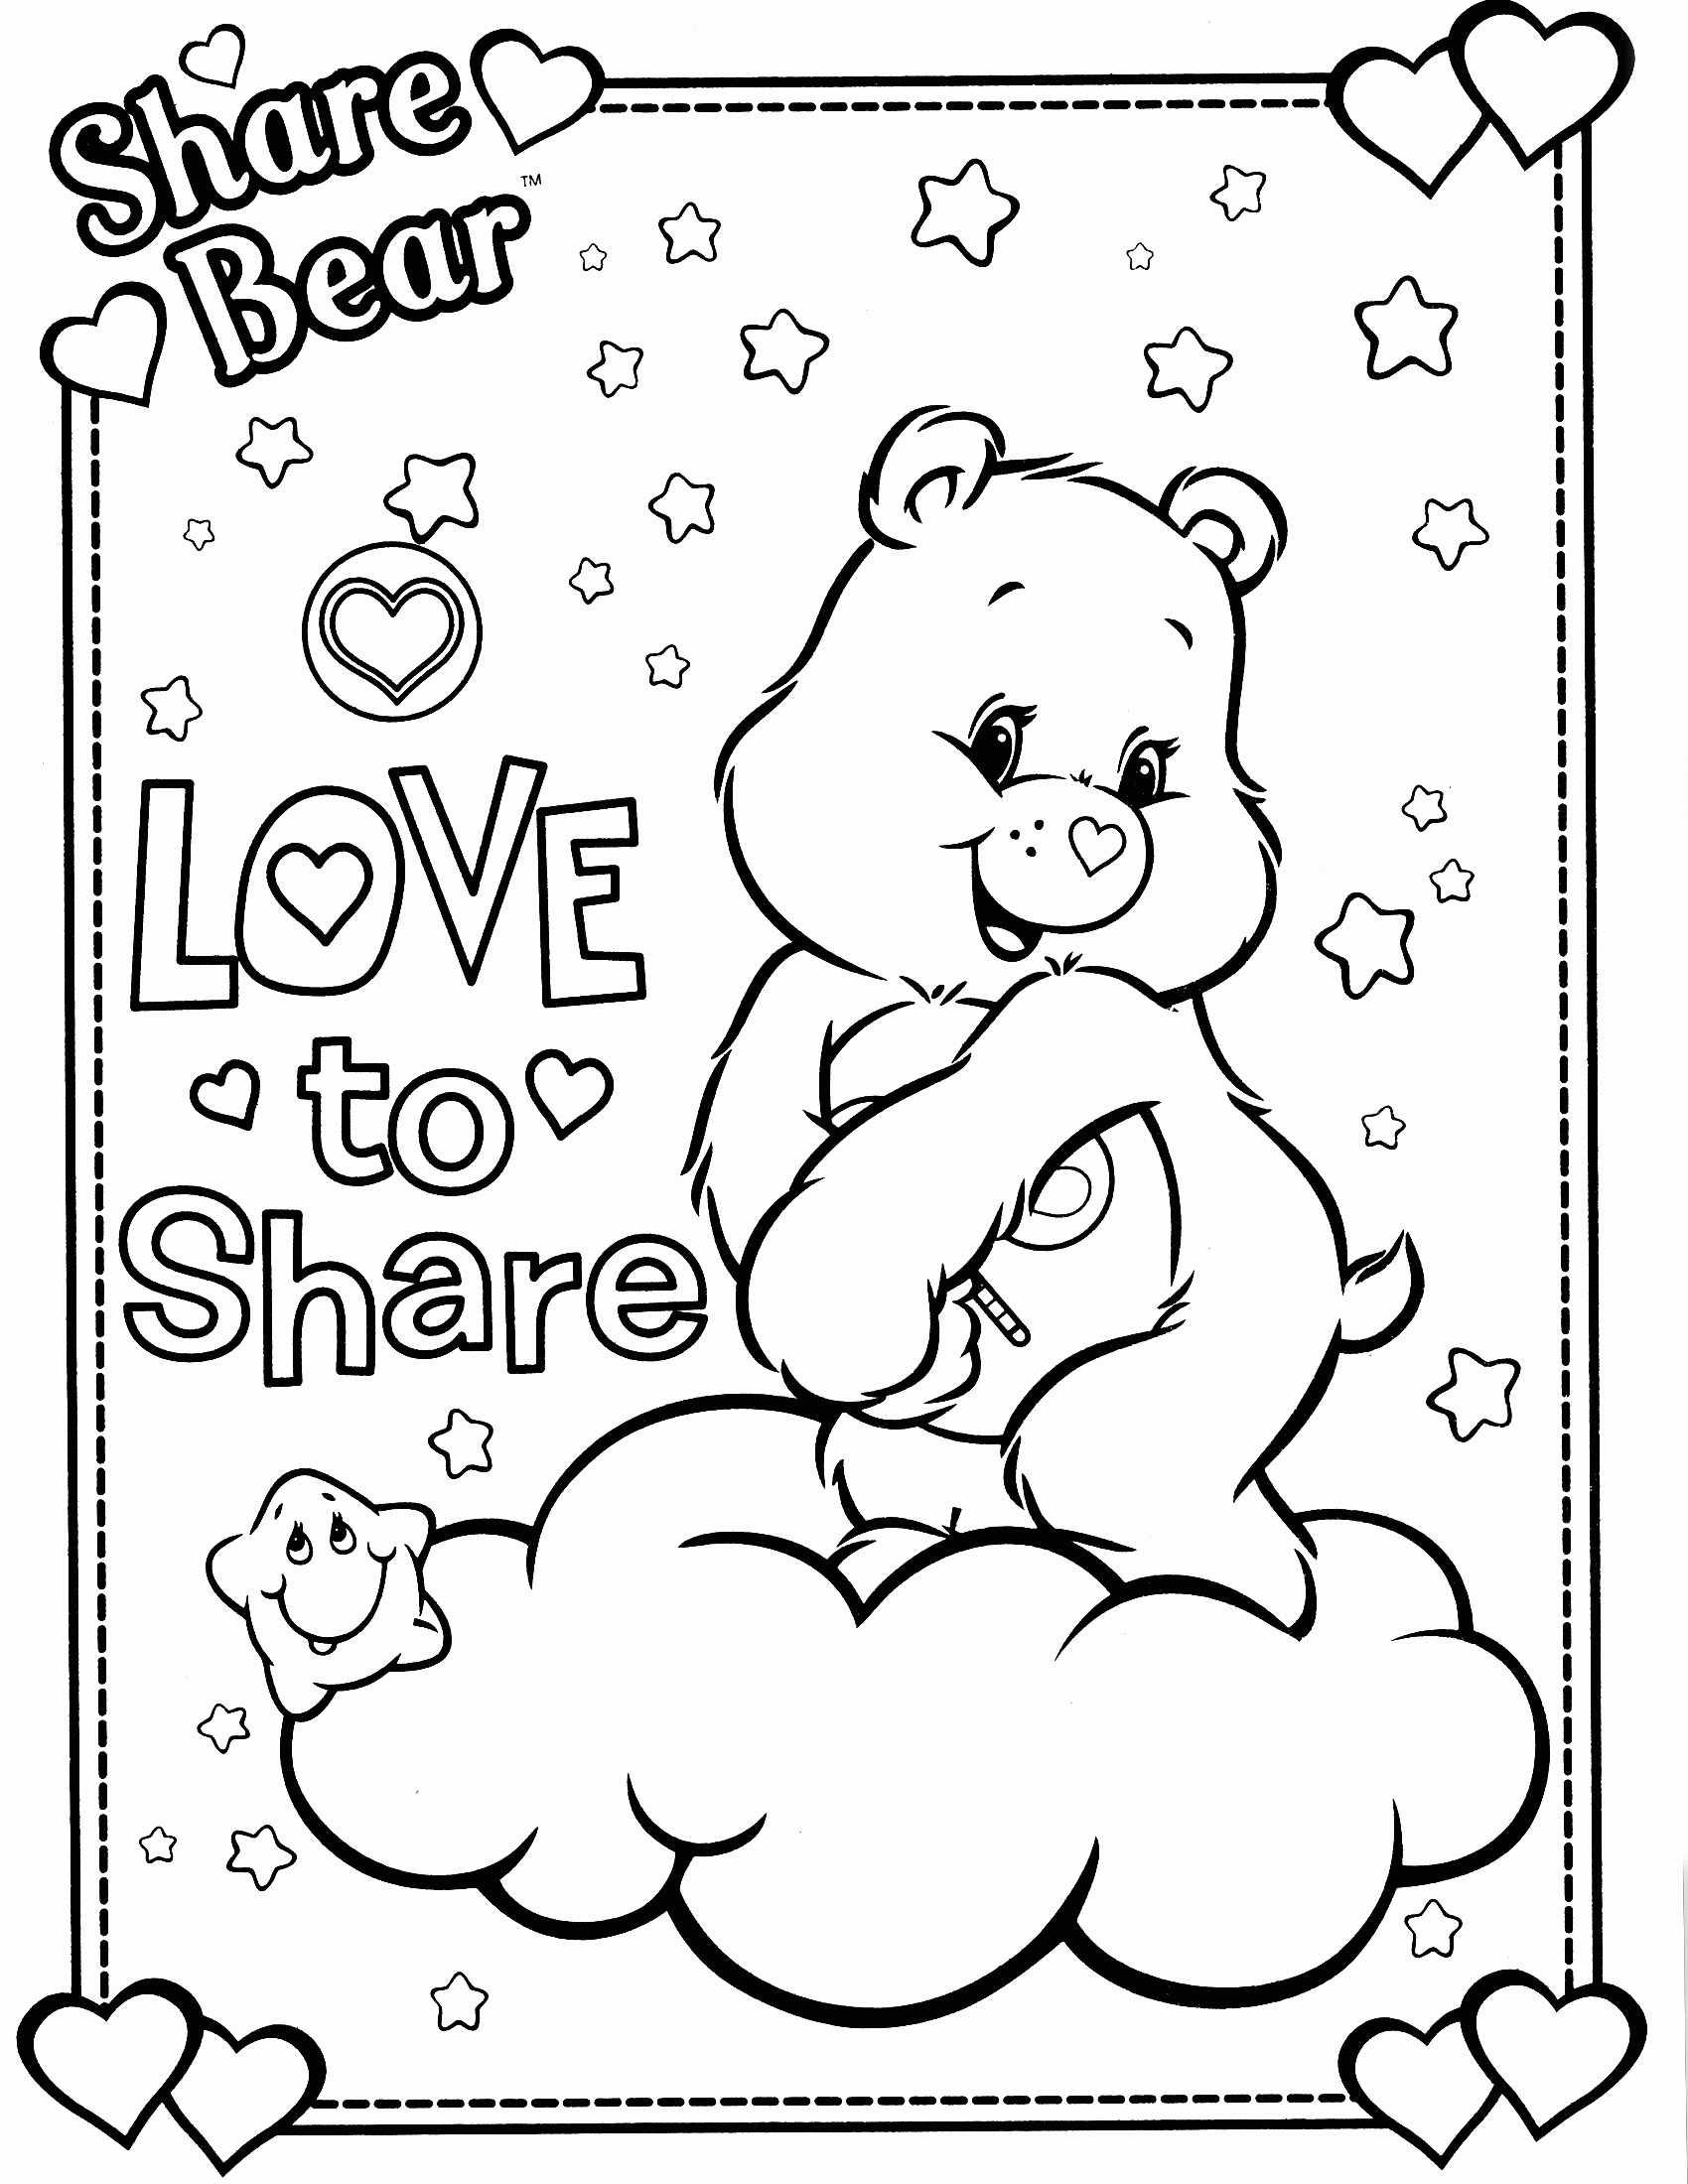 Care Bears Coloring Pages Halloween   Coloring Pages For All Ages ...